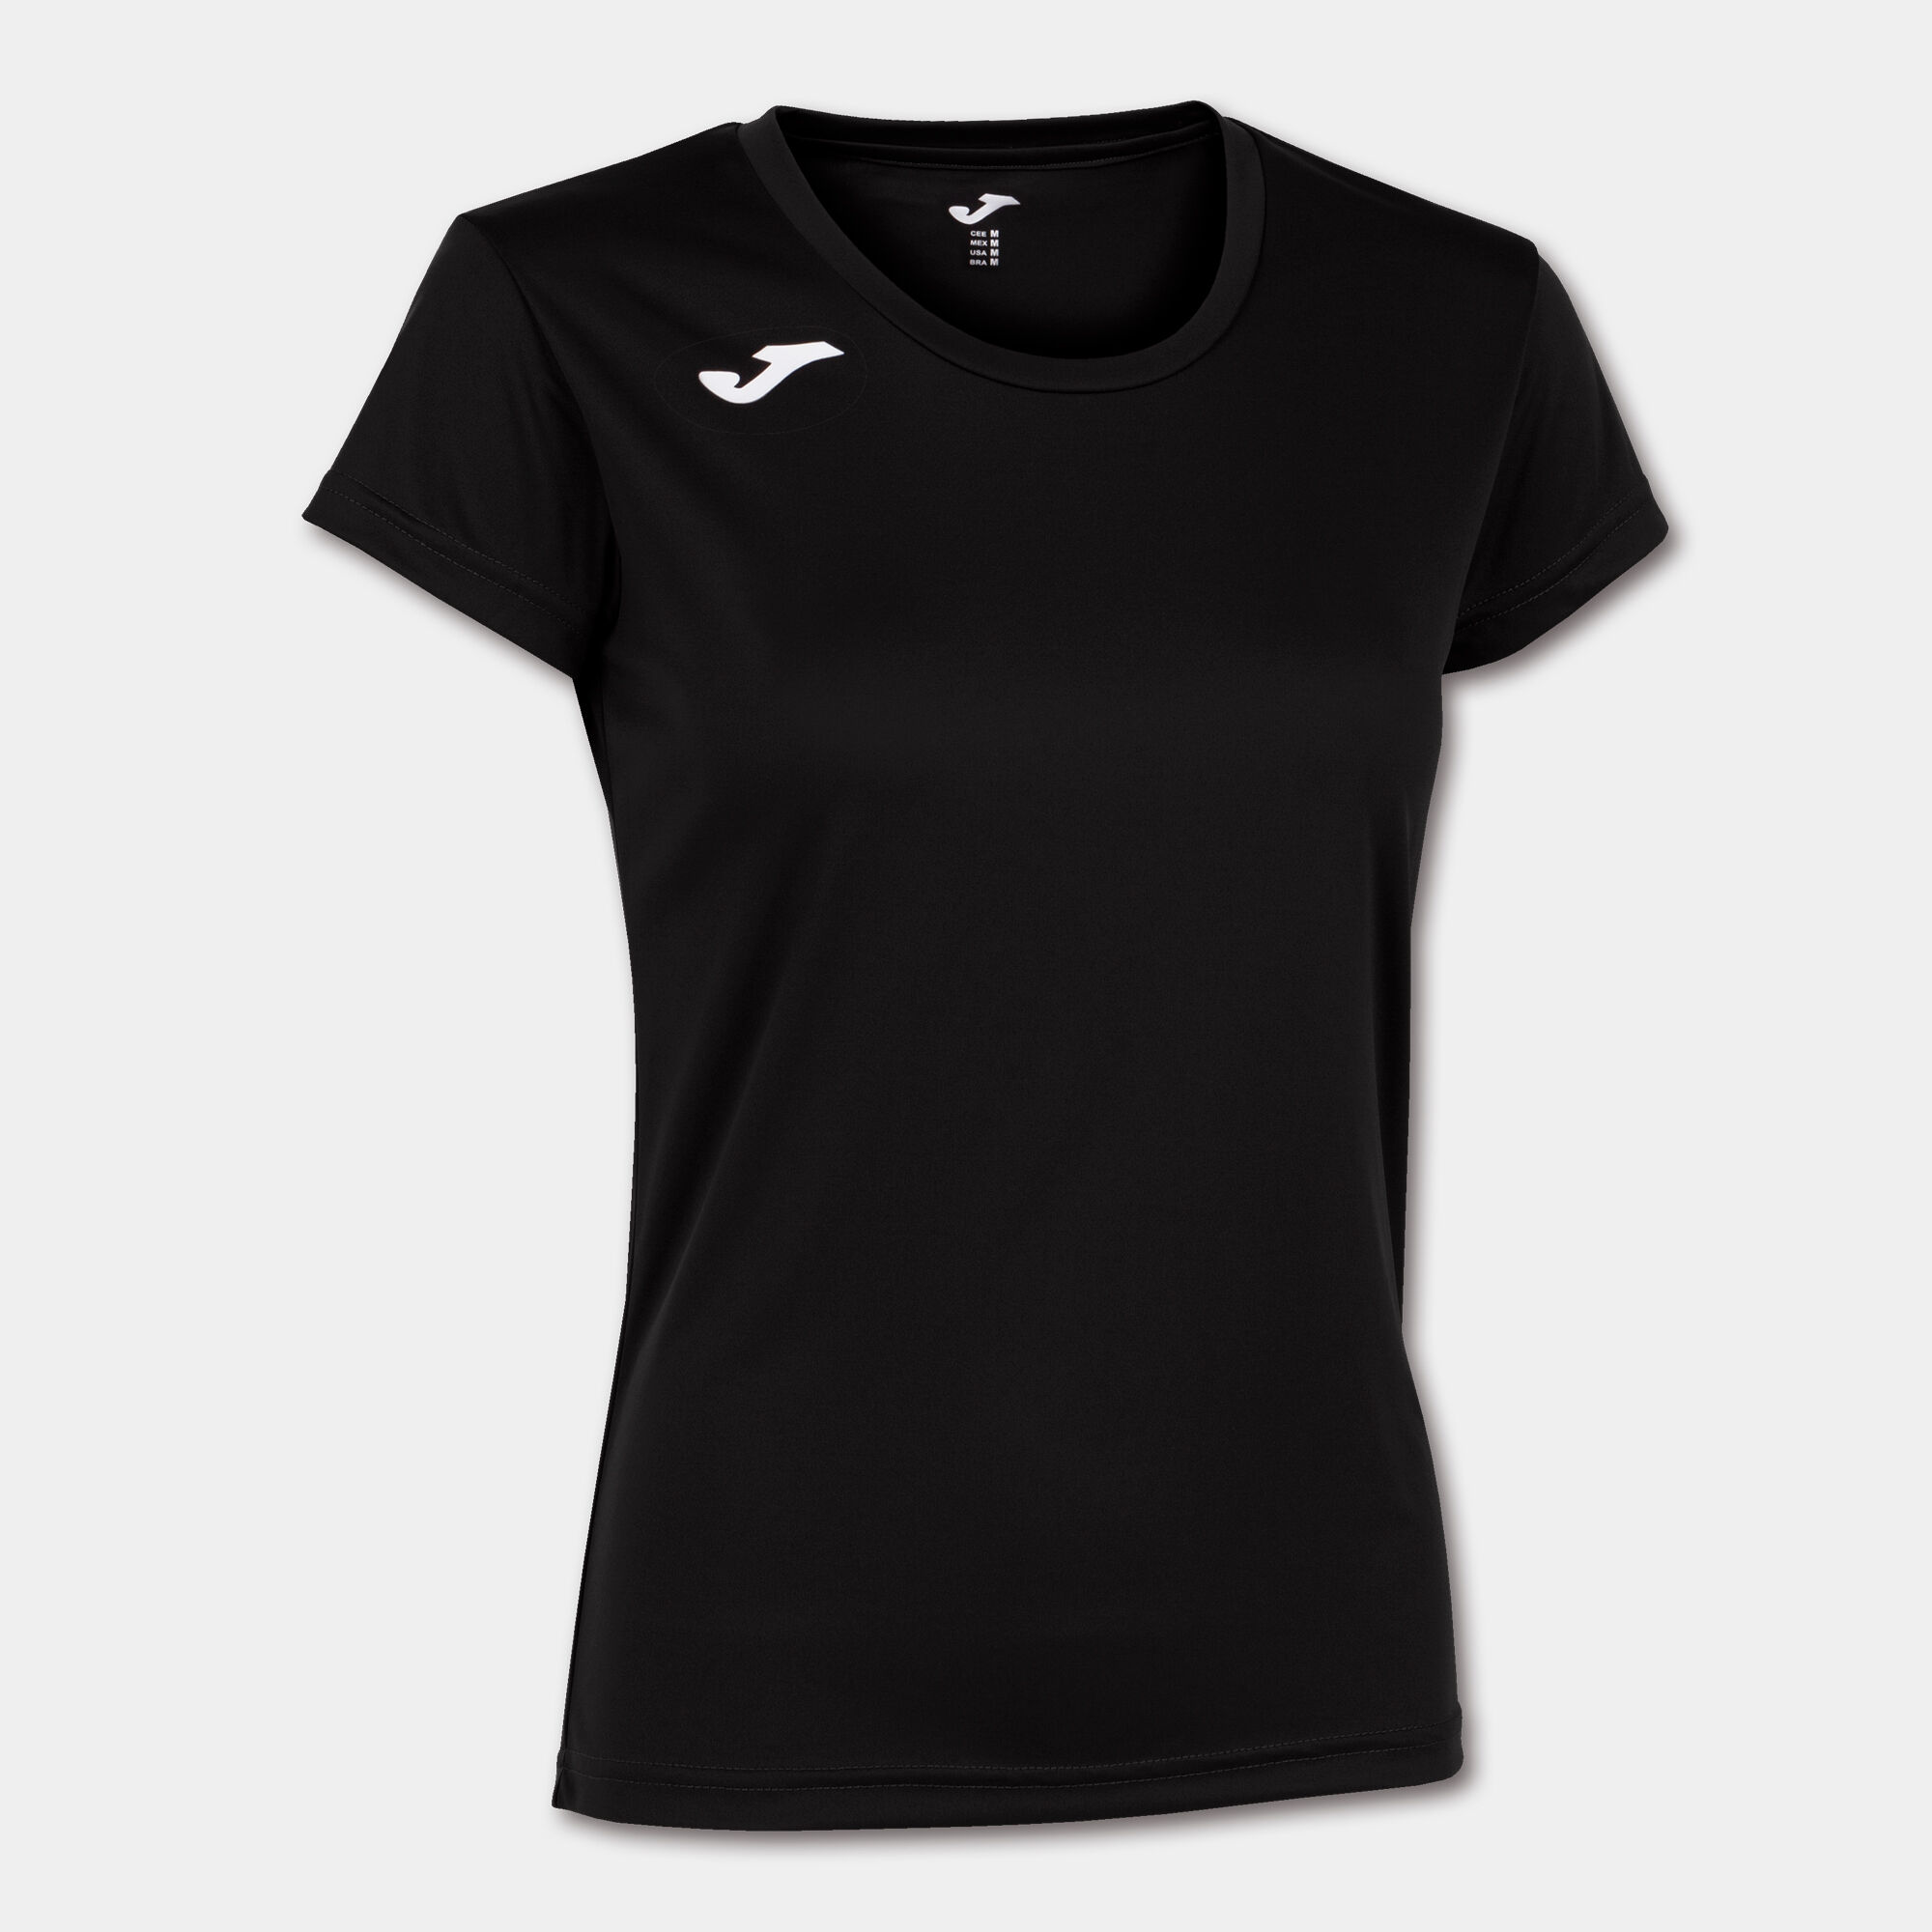 MAILLOT MANCHES COURTES FEMME RECORD II NOIR